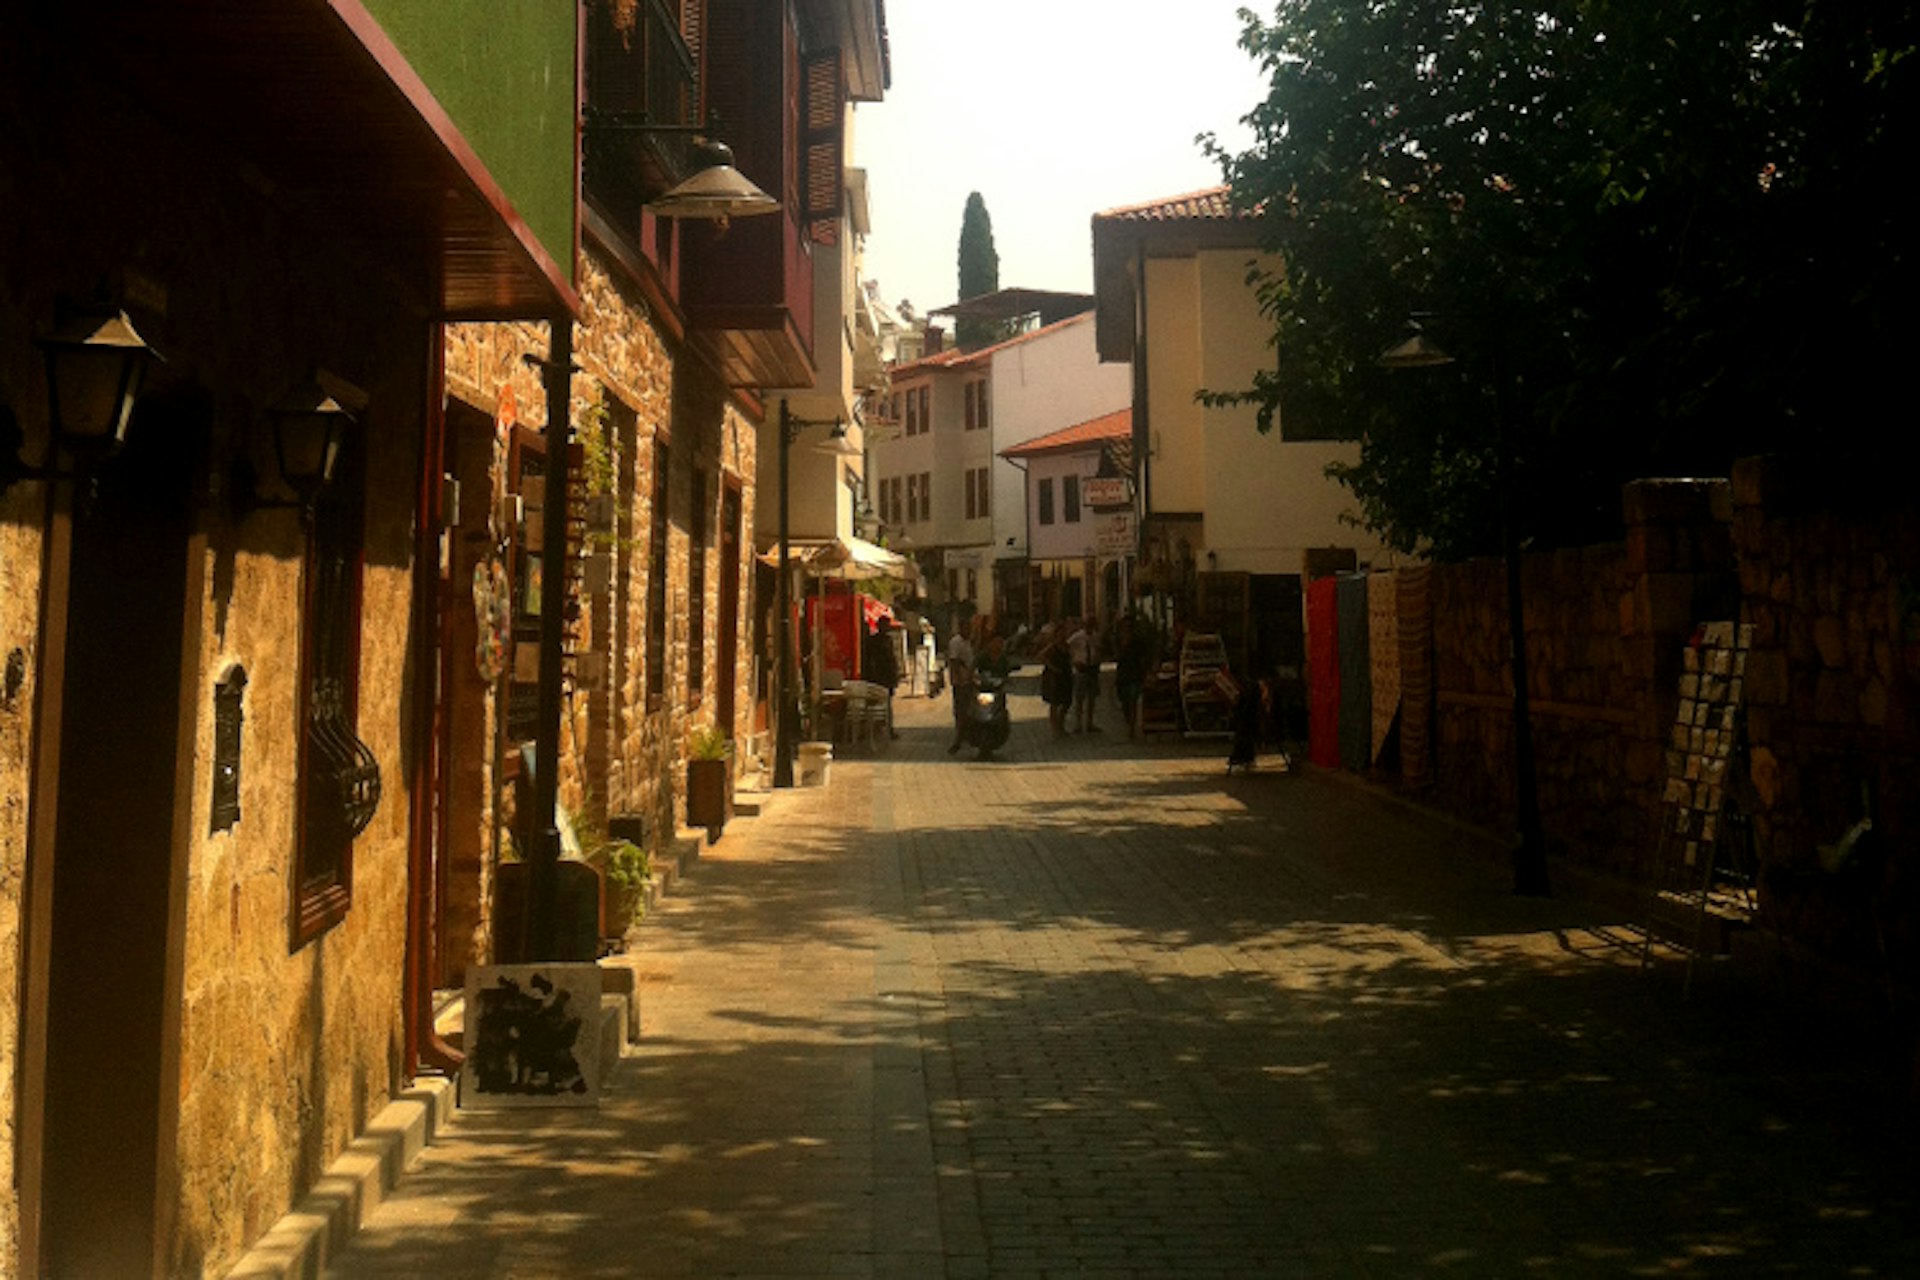 A quiet street in Kaleiçi, Antalya's old town. Image by Jo Cooke / Lonely Planet